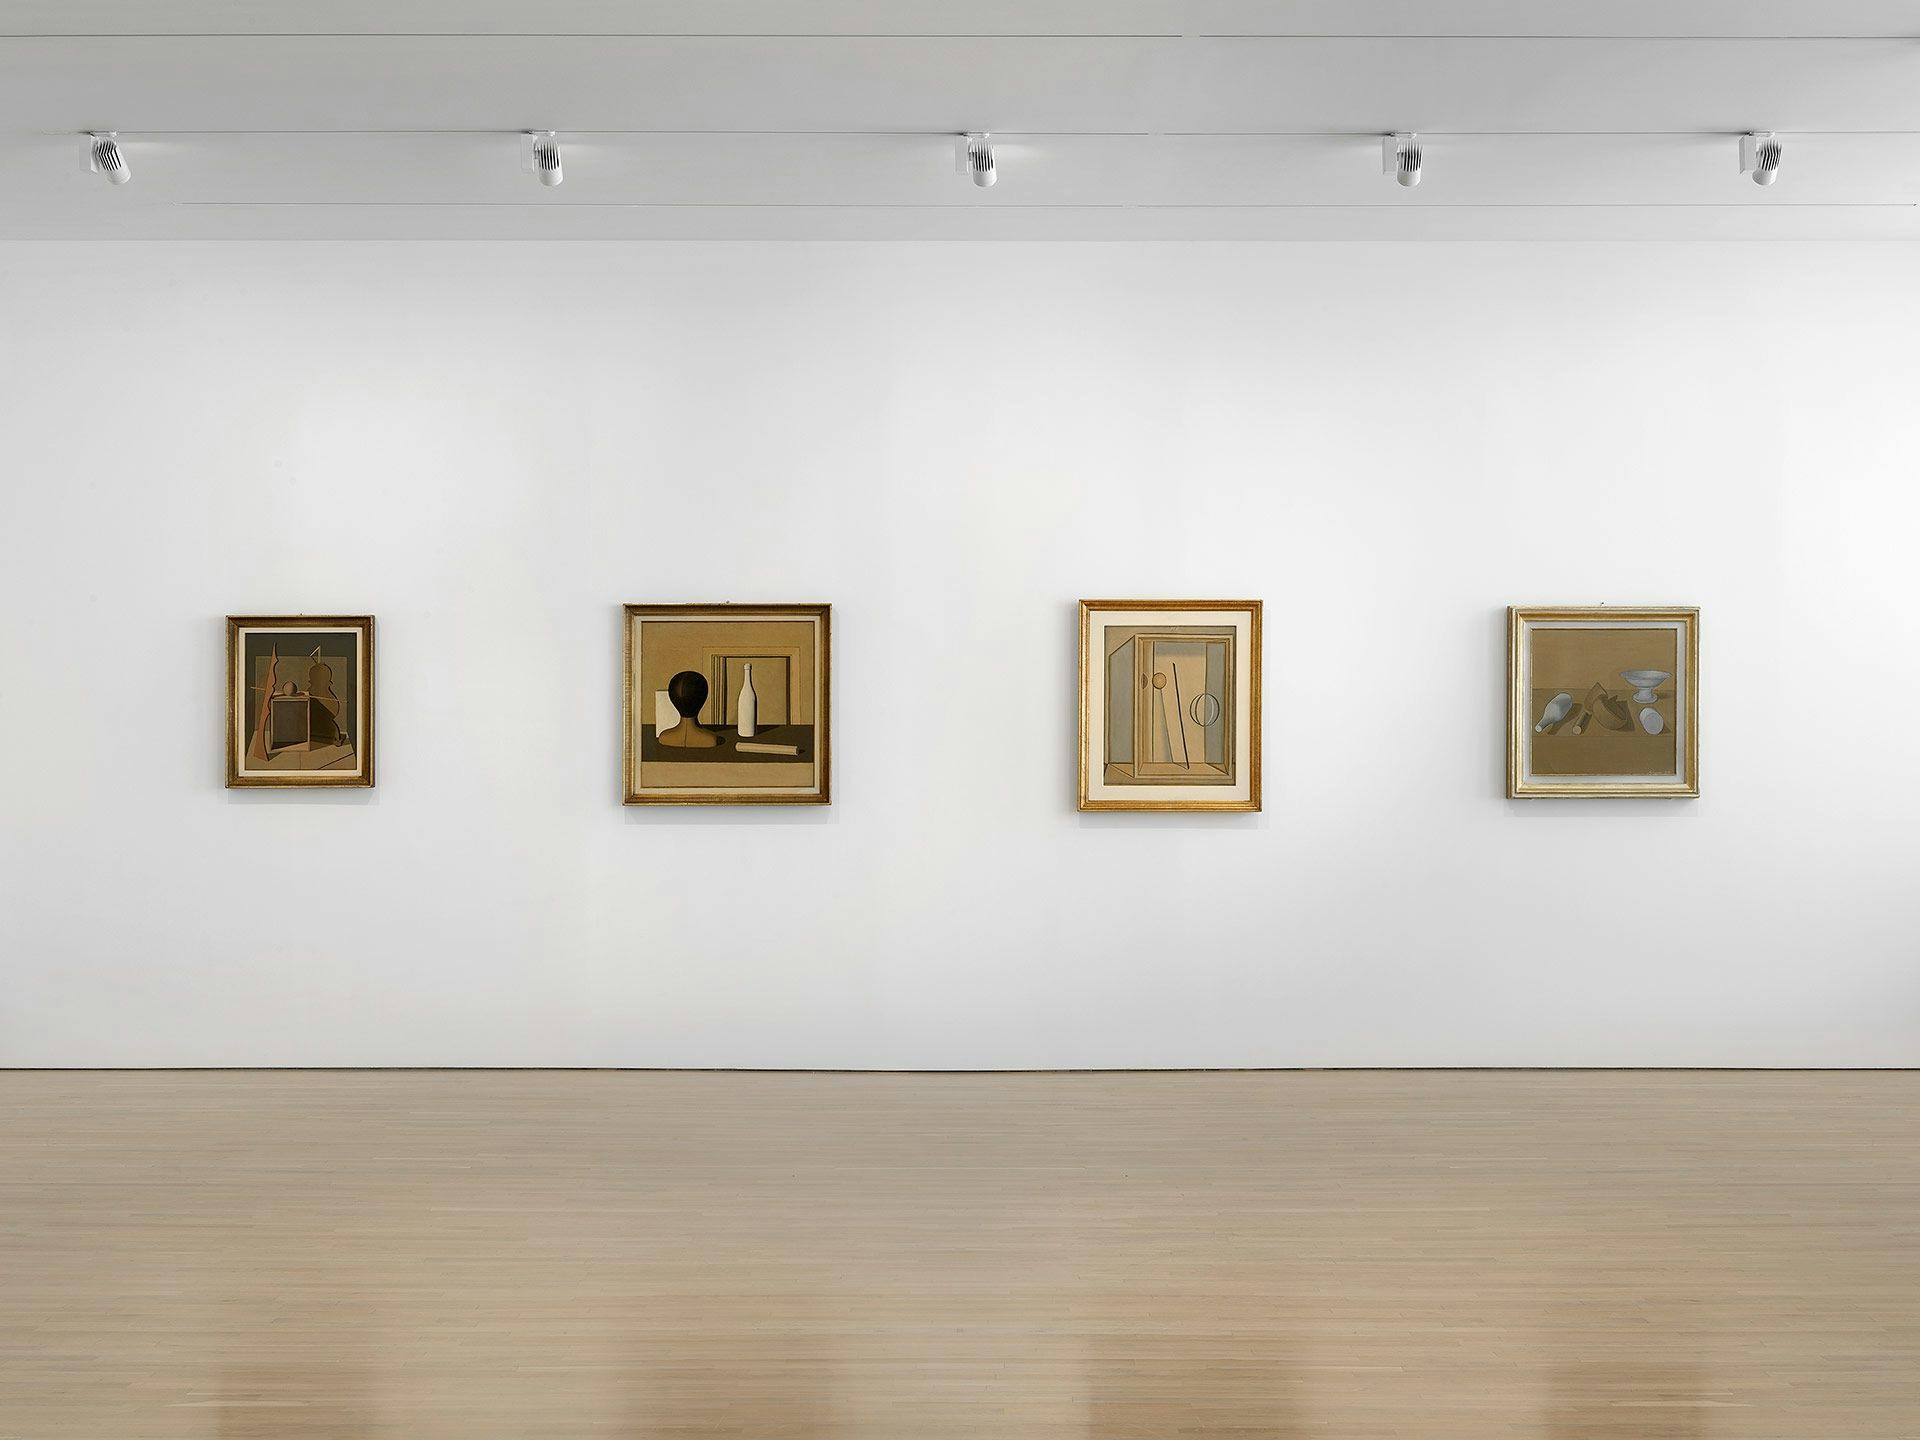 Installation view of the exhibition, Metaphysical Masterpieces 1916-1920: Morandi, Sironi, and Carrà, at the Center for Italian Modern Art in New York, 2018.